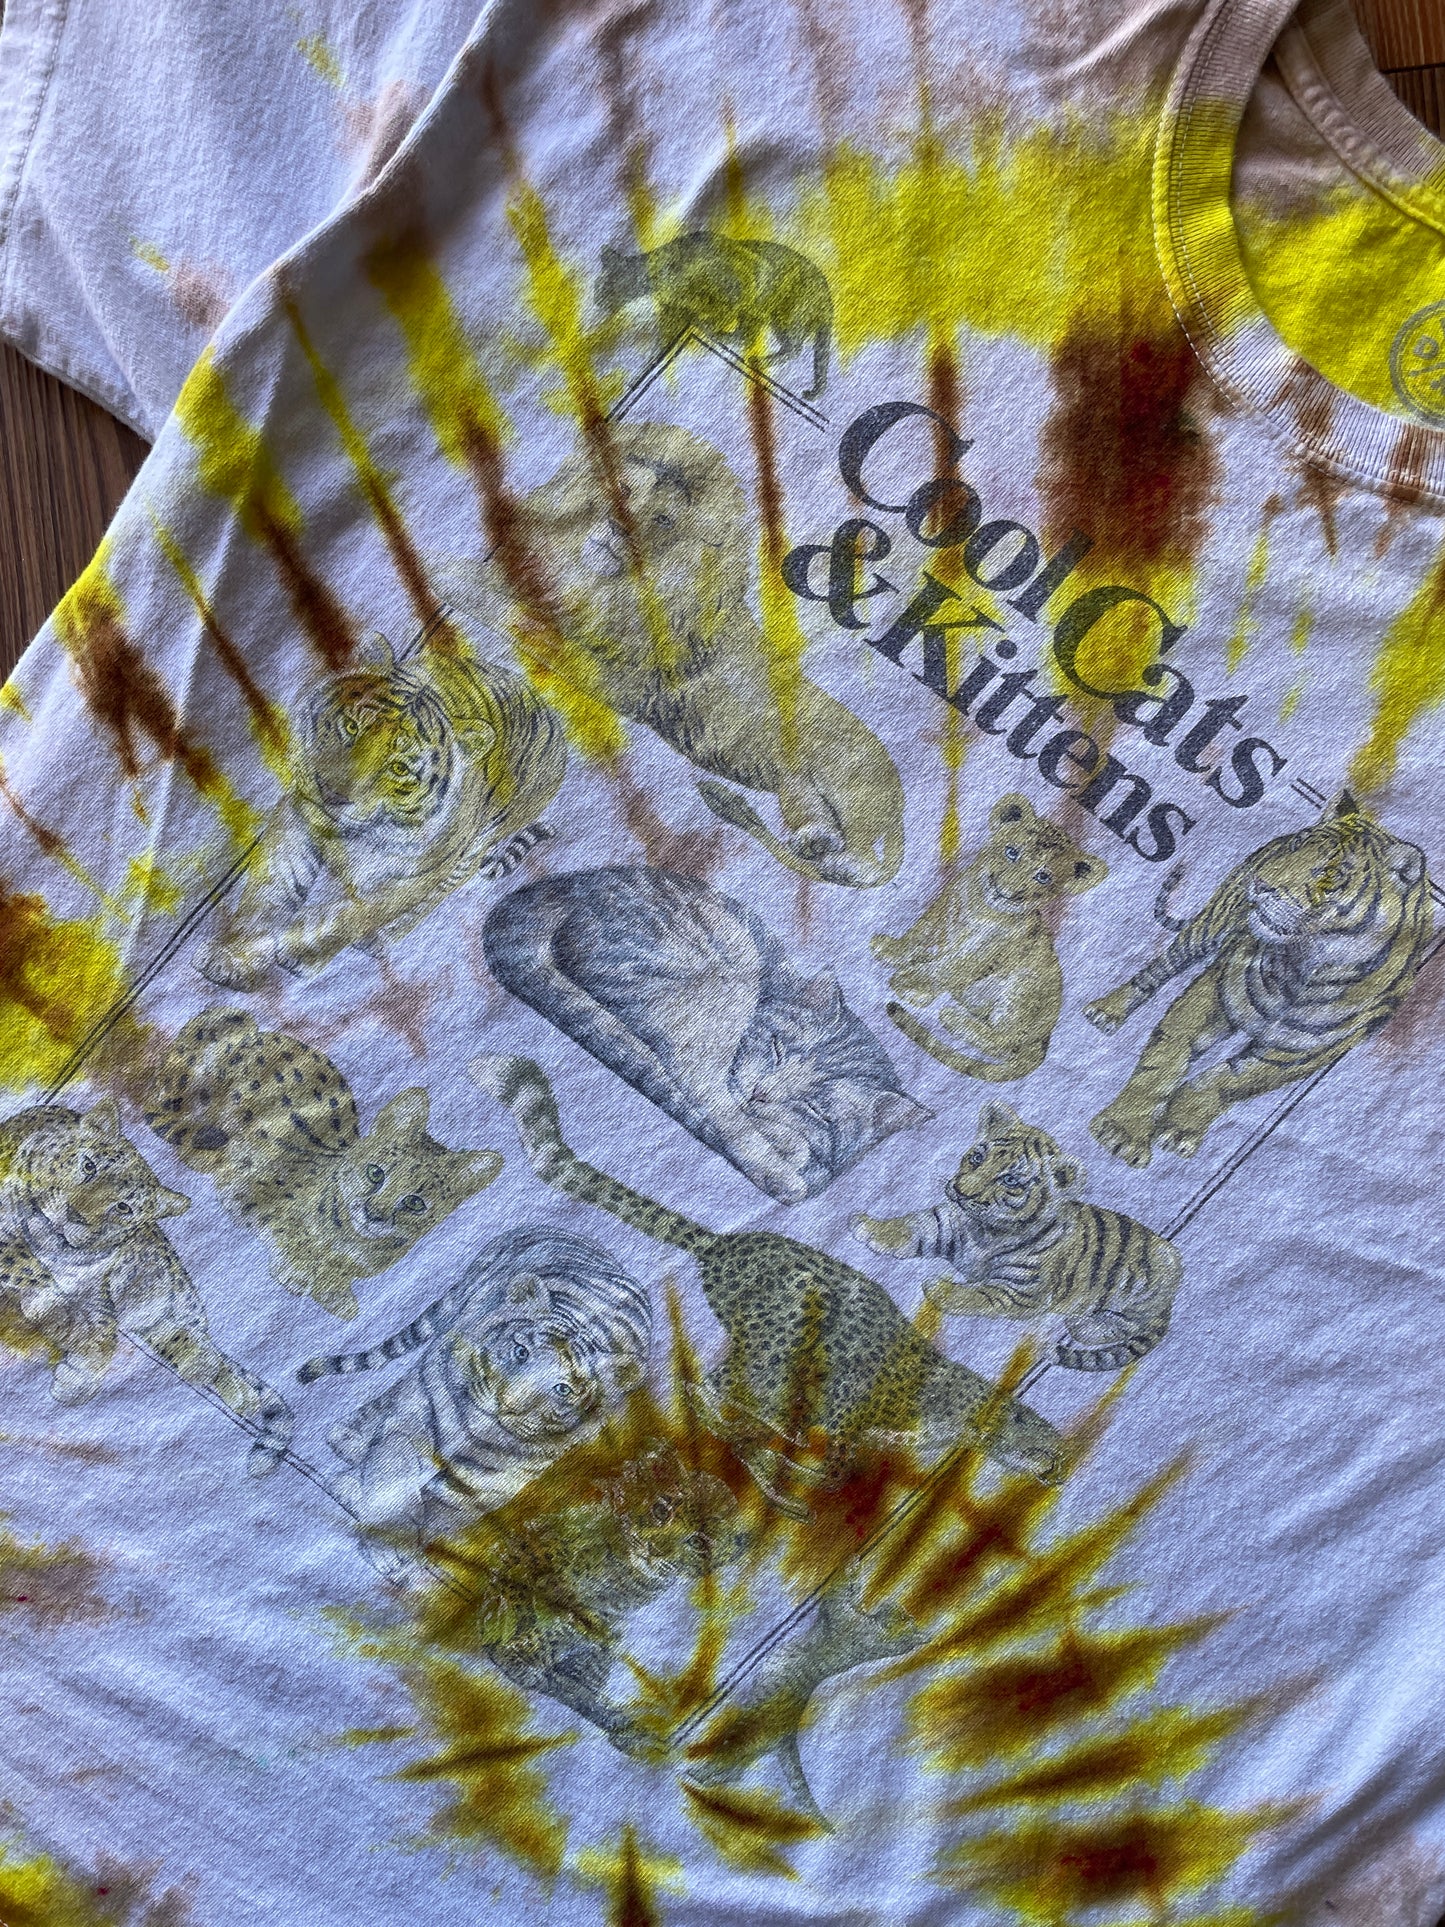 XL Men’s Cool Cats & Kittens Handmade Tie Dye T-Shirt | One-Of-a-Kind Yellow and White Spiral Short Sleeve